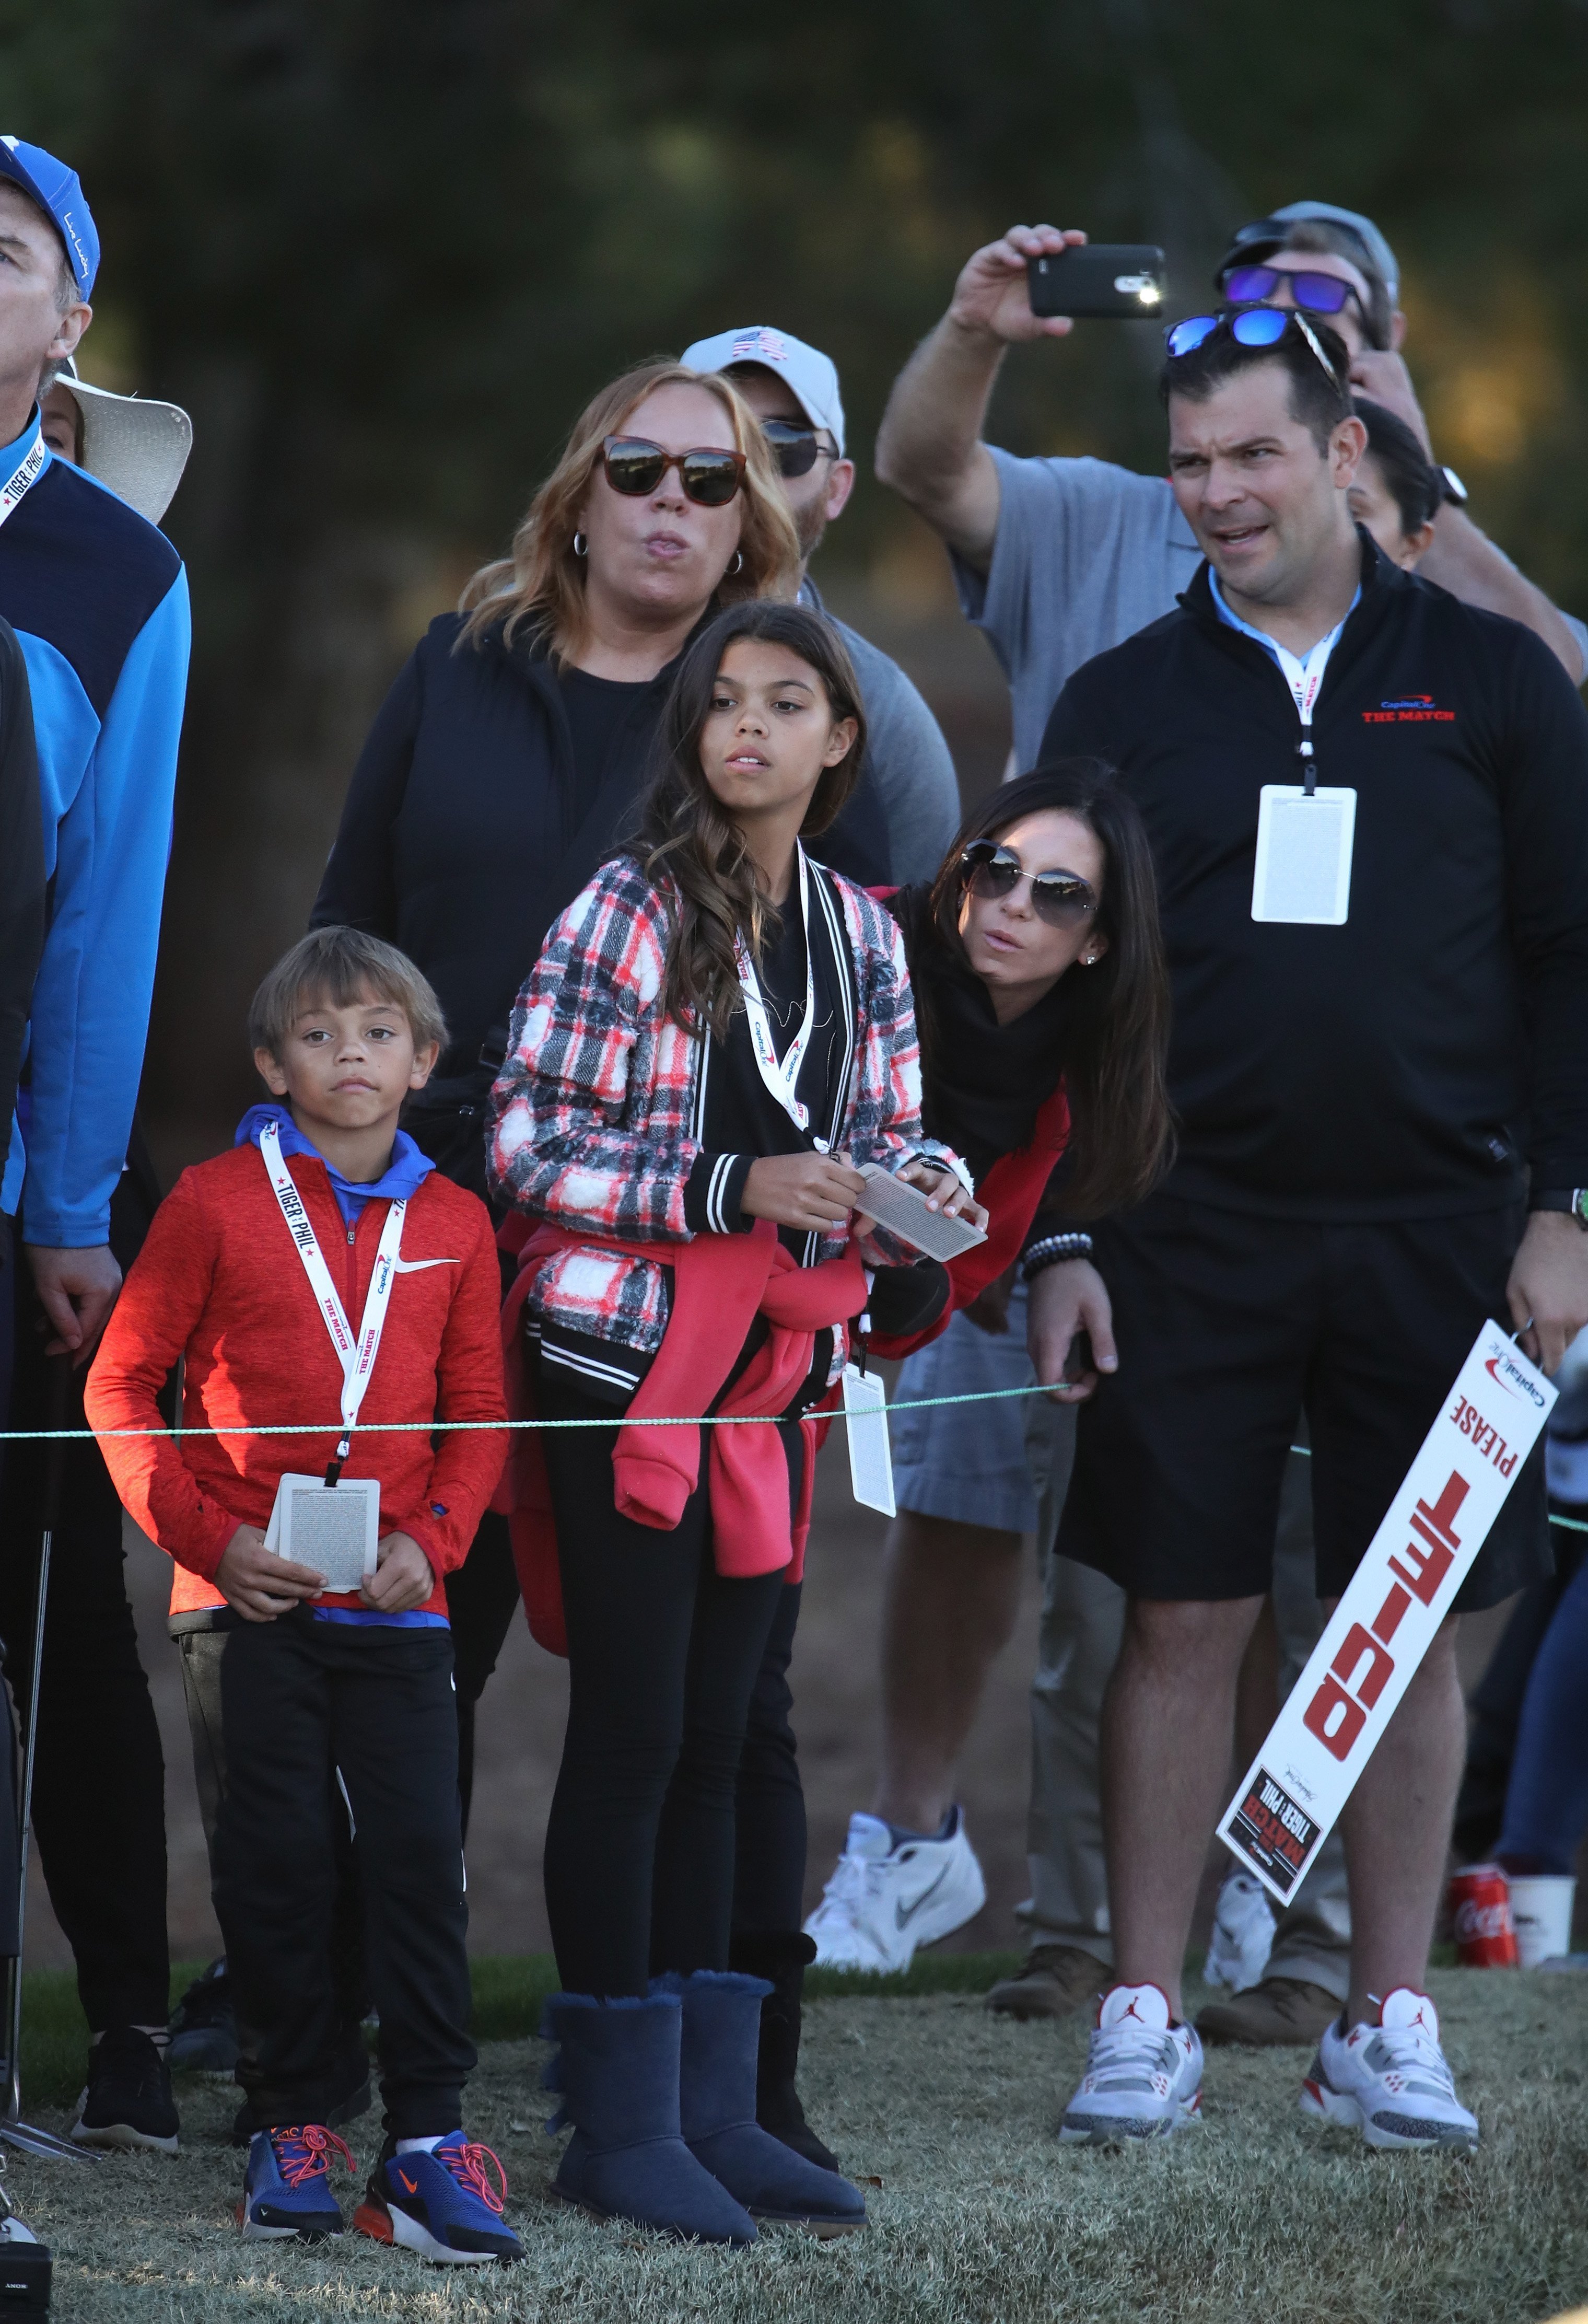 Erica Herman, girlfriend of Tiger Woods, and his children Sam and Charlie look on during The Match: Tiger vs Phil at Shadow Creek Golf Course on November 23, 2018, in Las Vegas, Nevada. | Source: Getty Images.